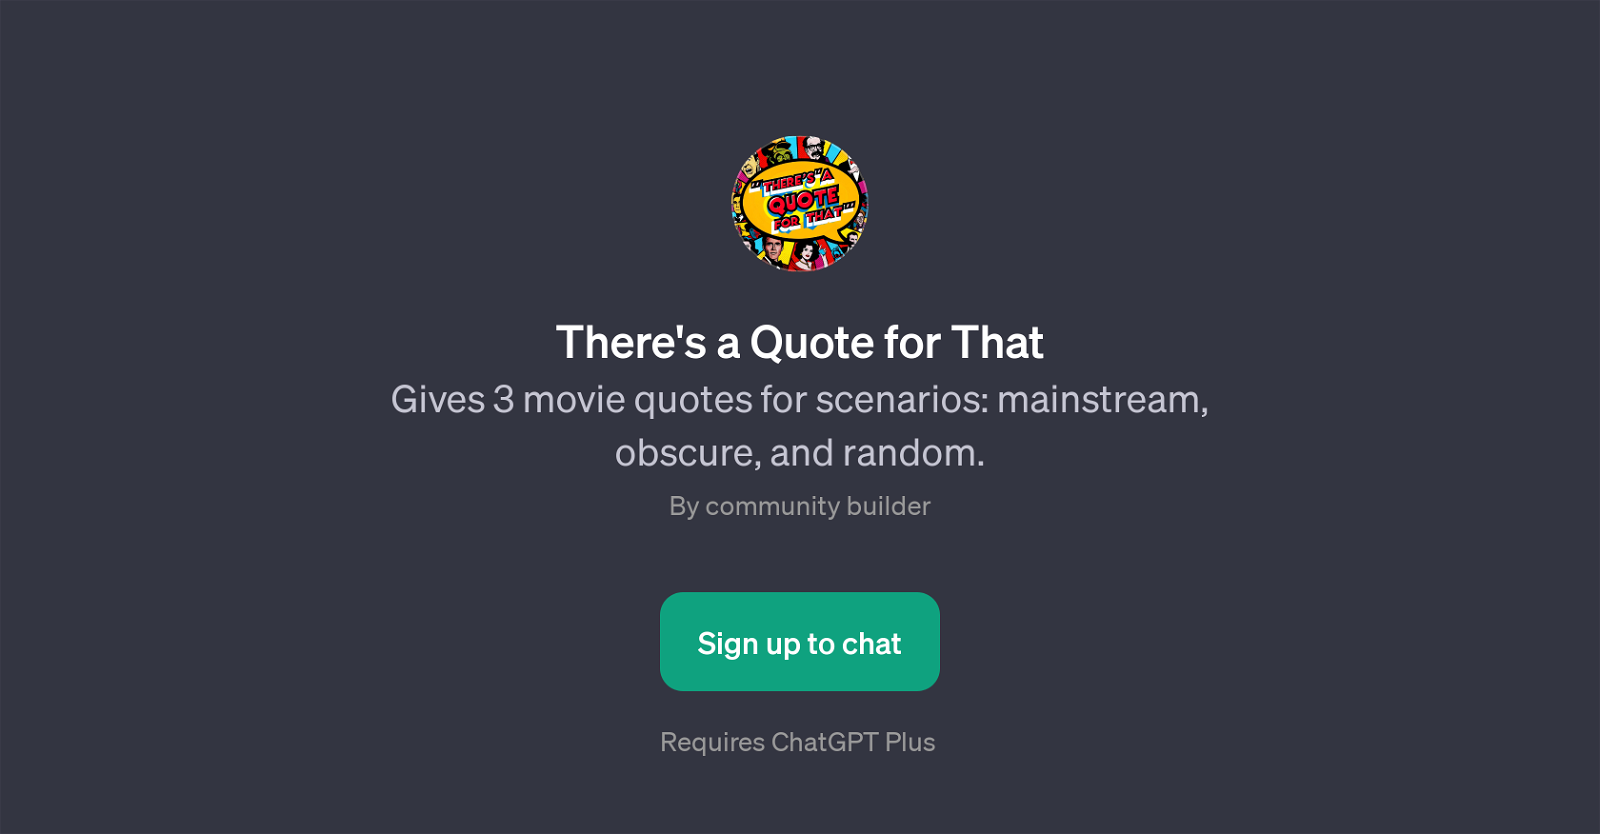 There's a Quote for That website